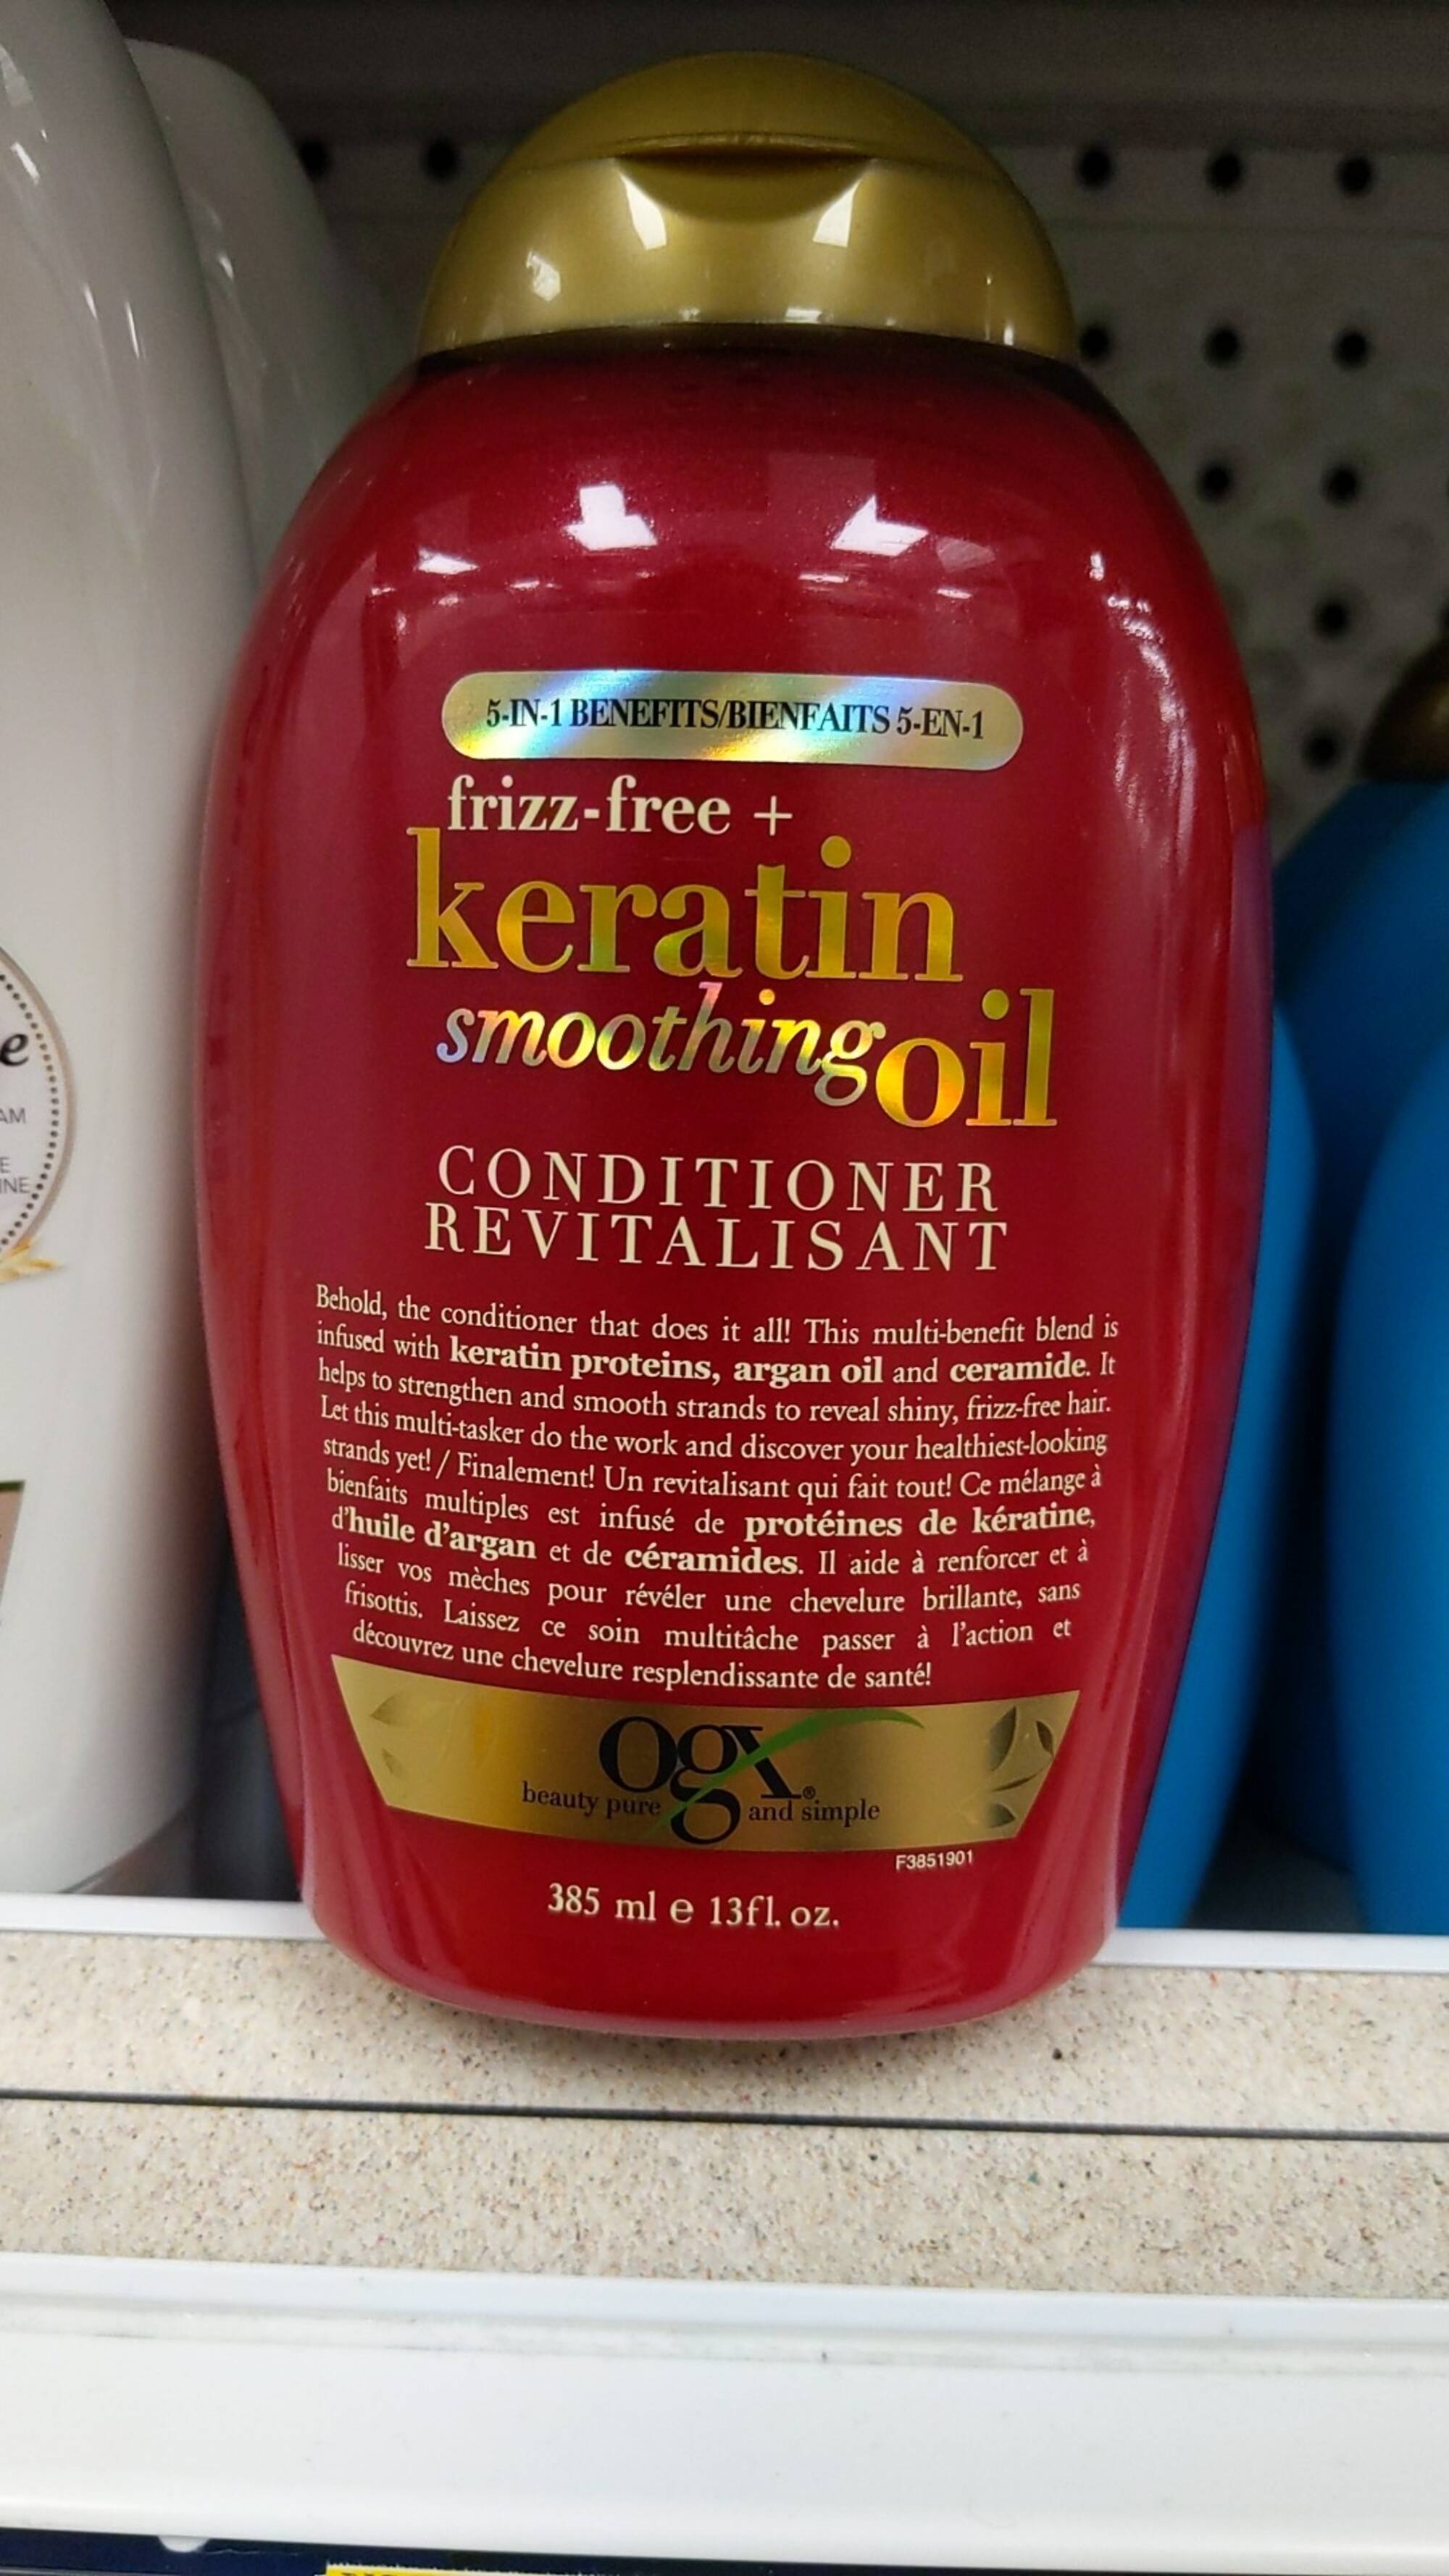 OGX - Frizz-free + keratin smoothing oil conditioner